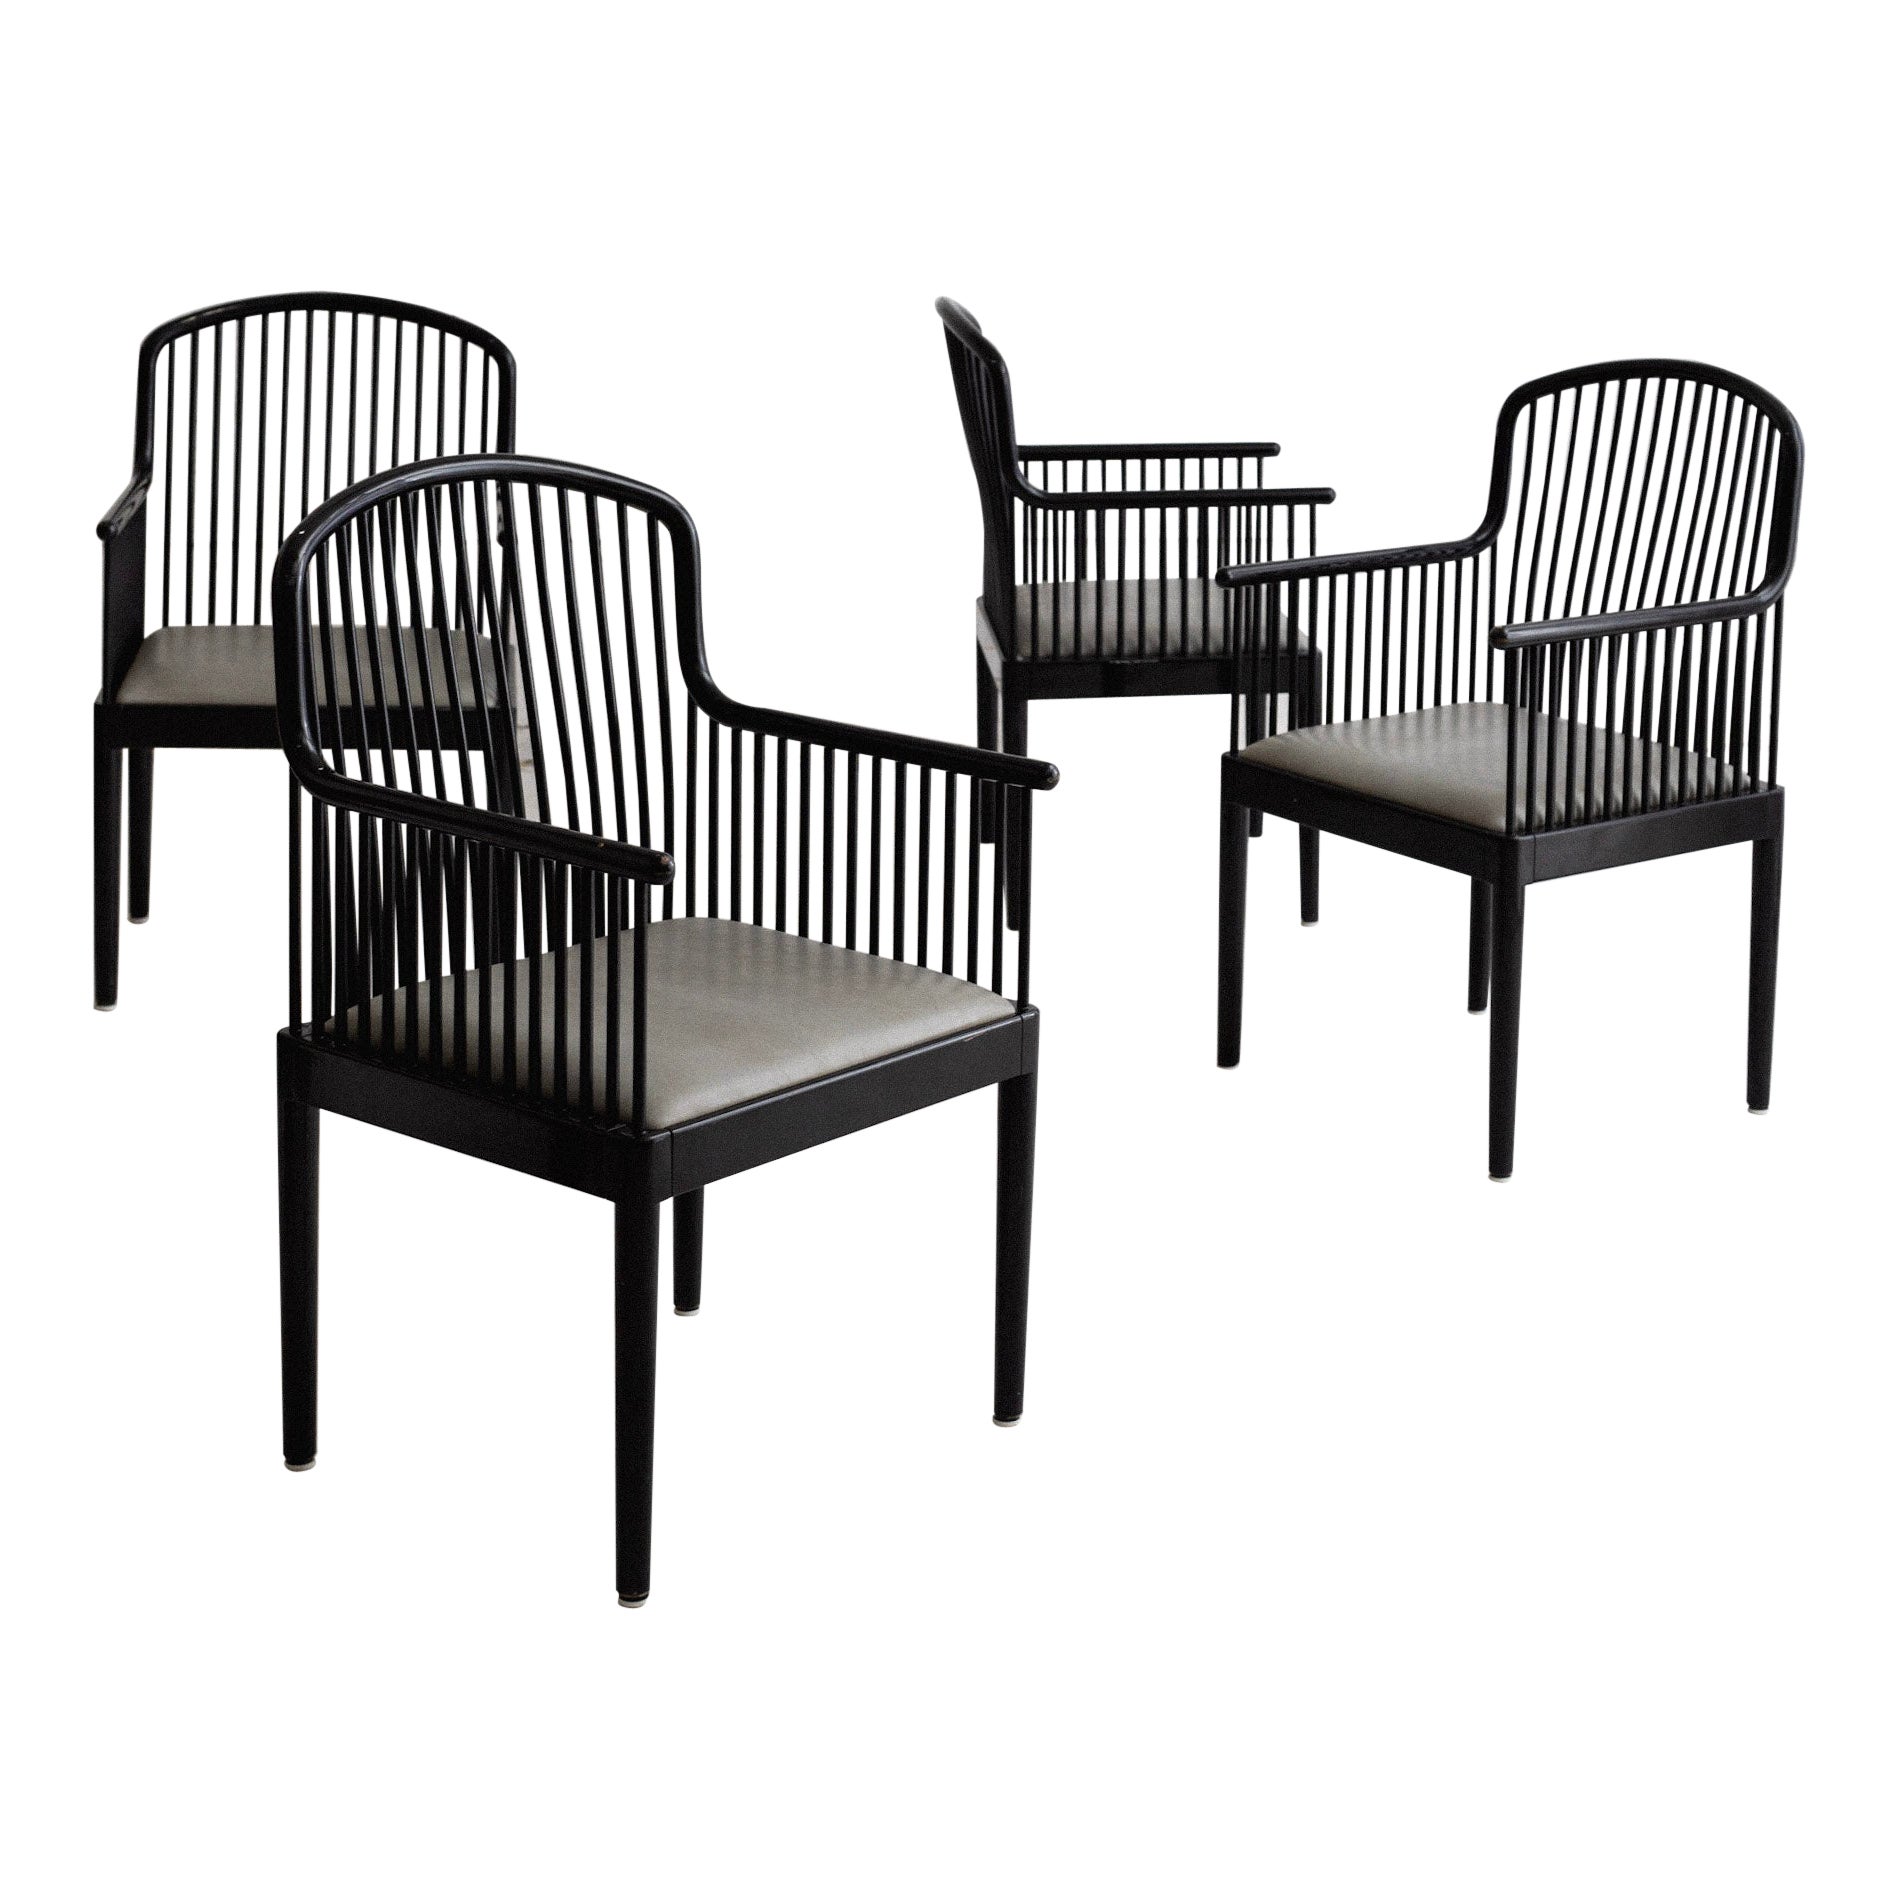 ‘Andover’ Chairs by Davis Allen for Stendig, a Set of 4